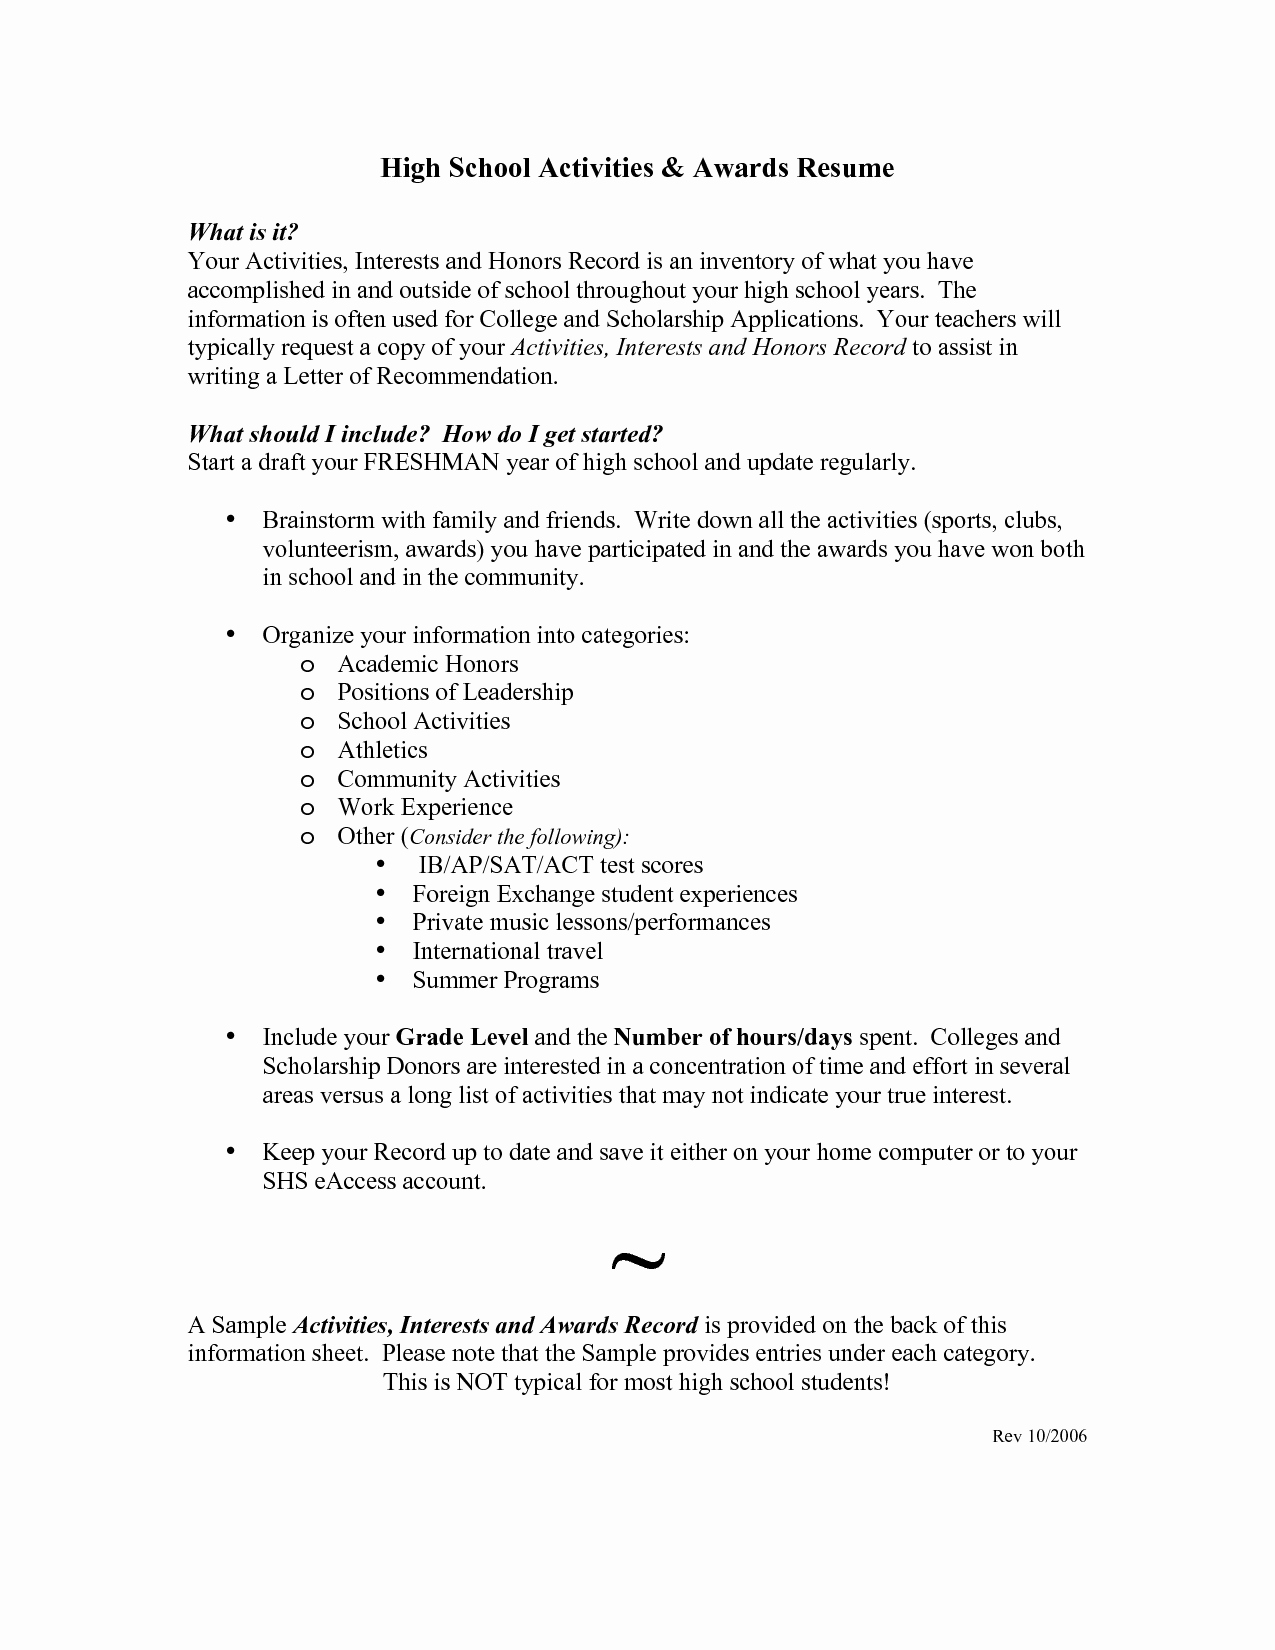 Example Resume for High School Student for College